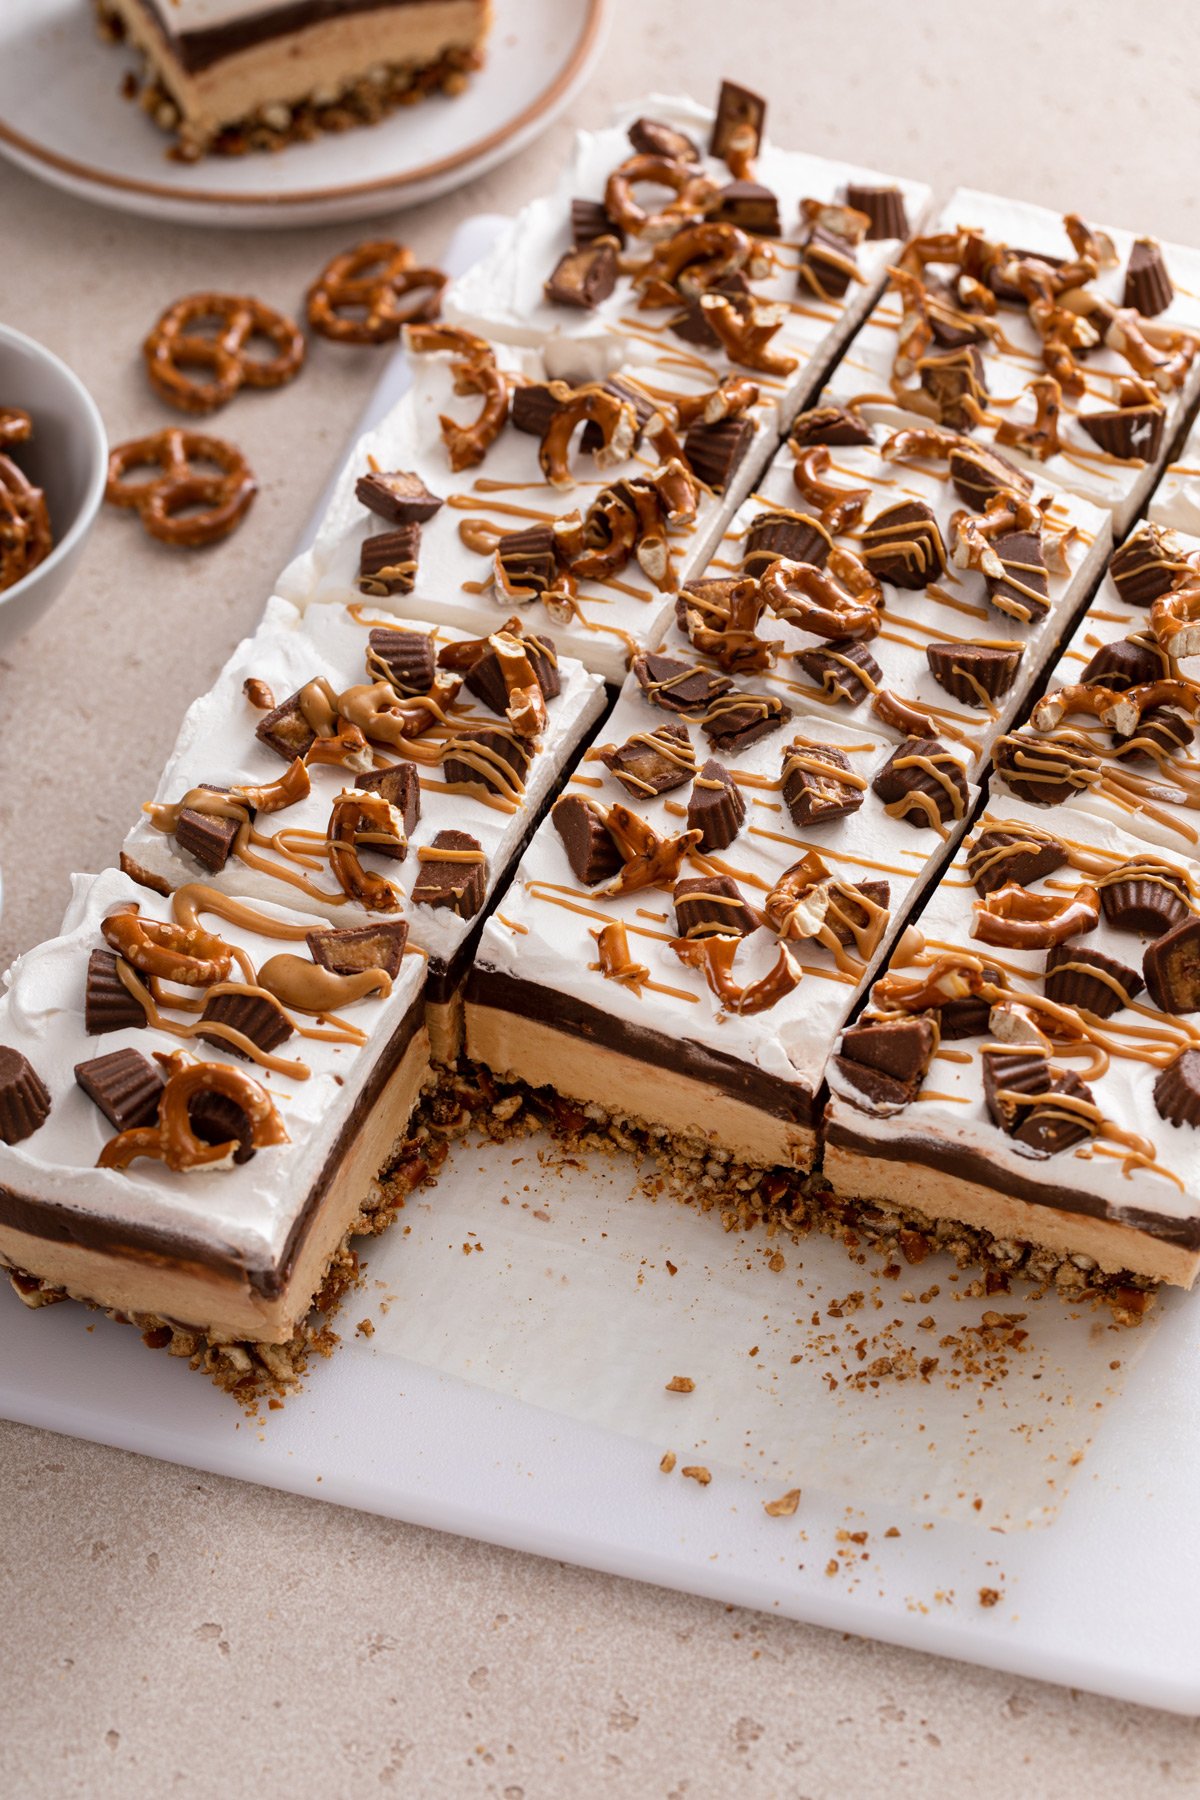 Peanut butter pretzel dessert with two slices removed.